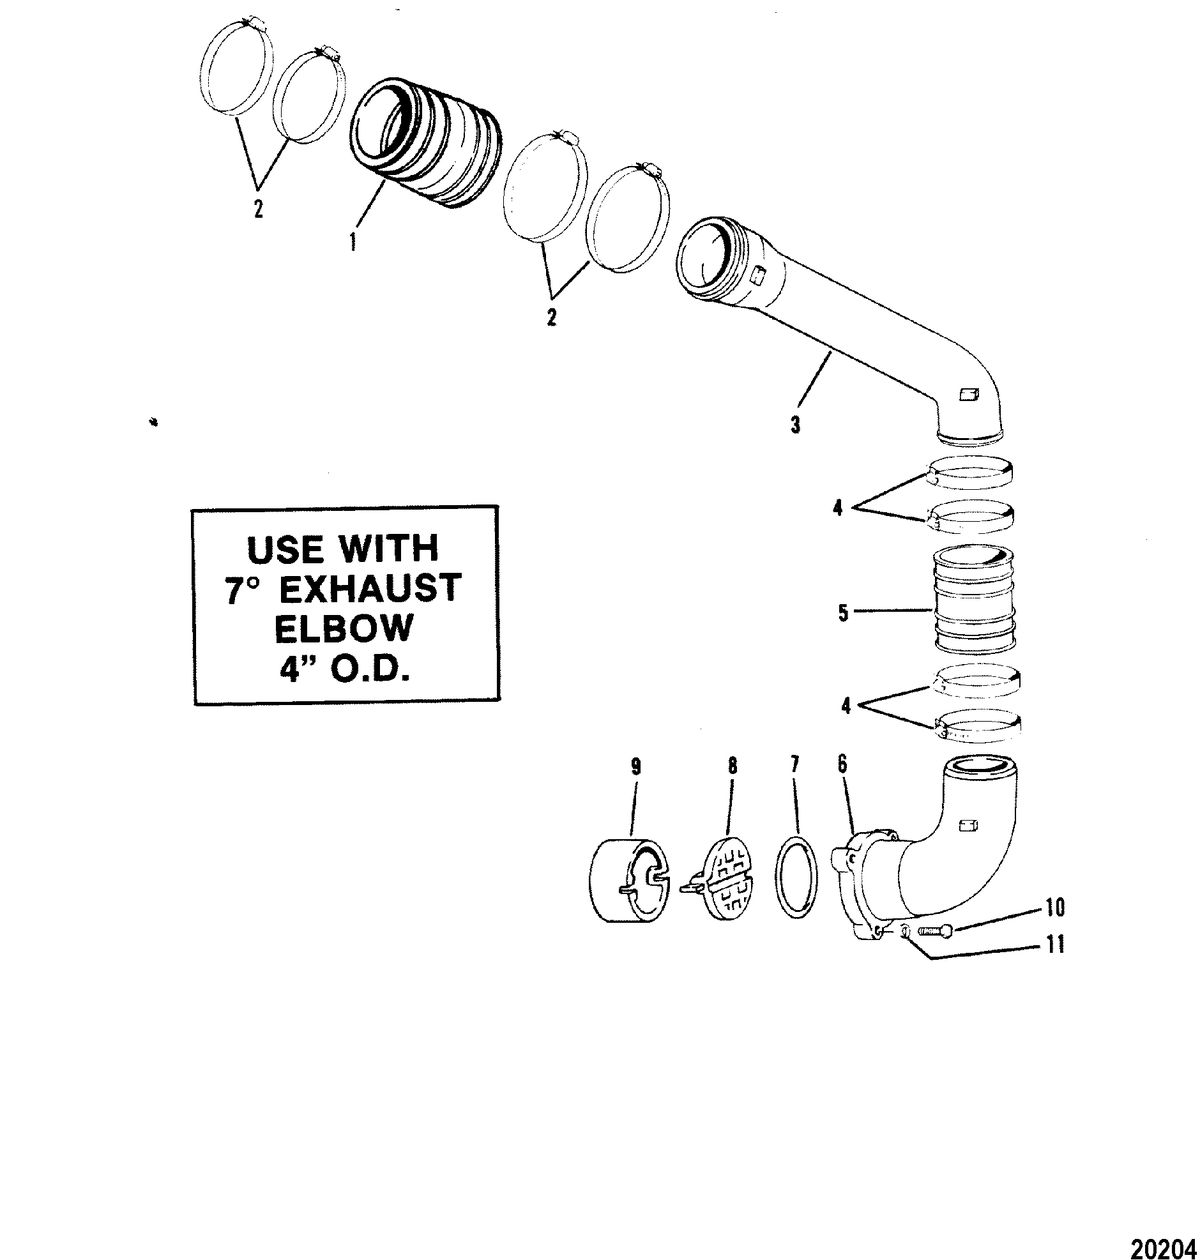 MERCRUISER 330 H.P. ENGINE W/BORG WARNER Exhaust System(Use With 7 Degree Exhaust Elbow)